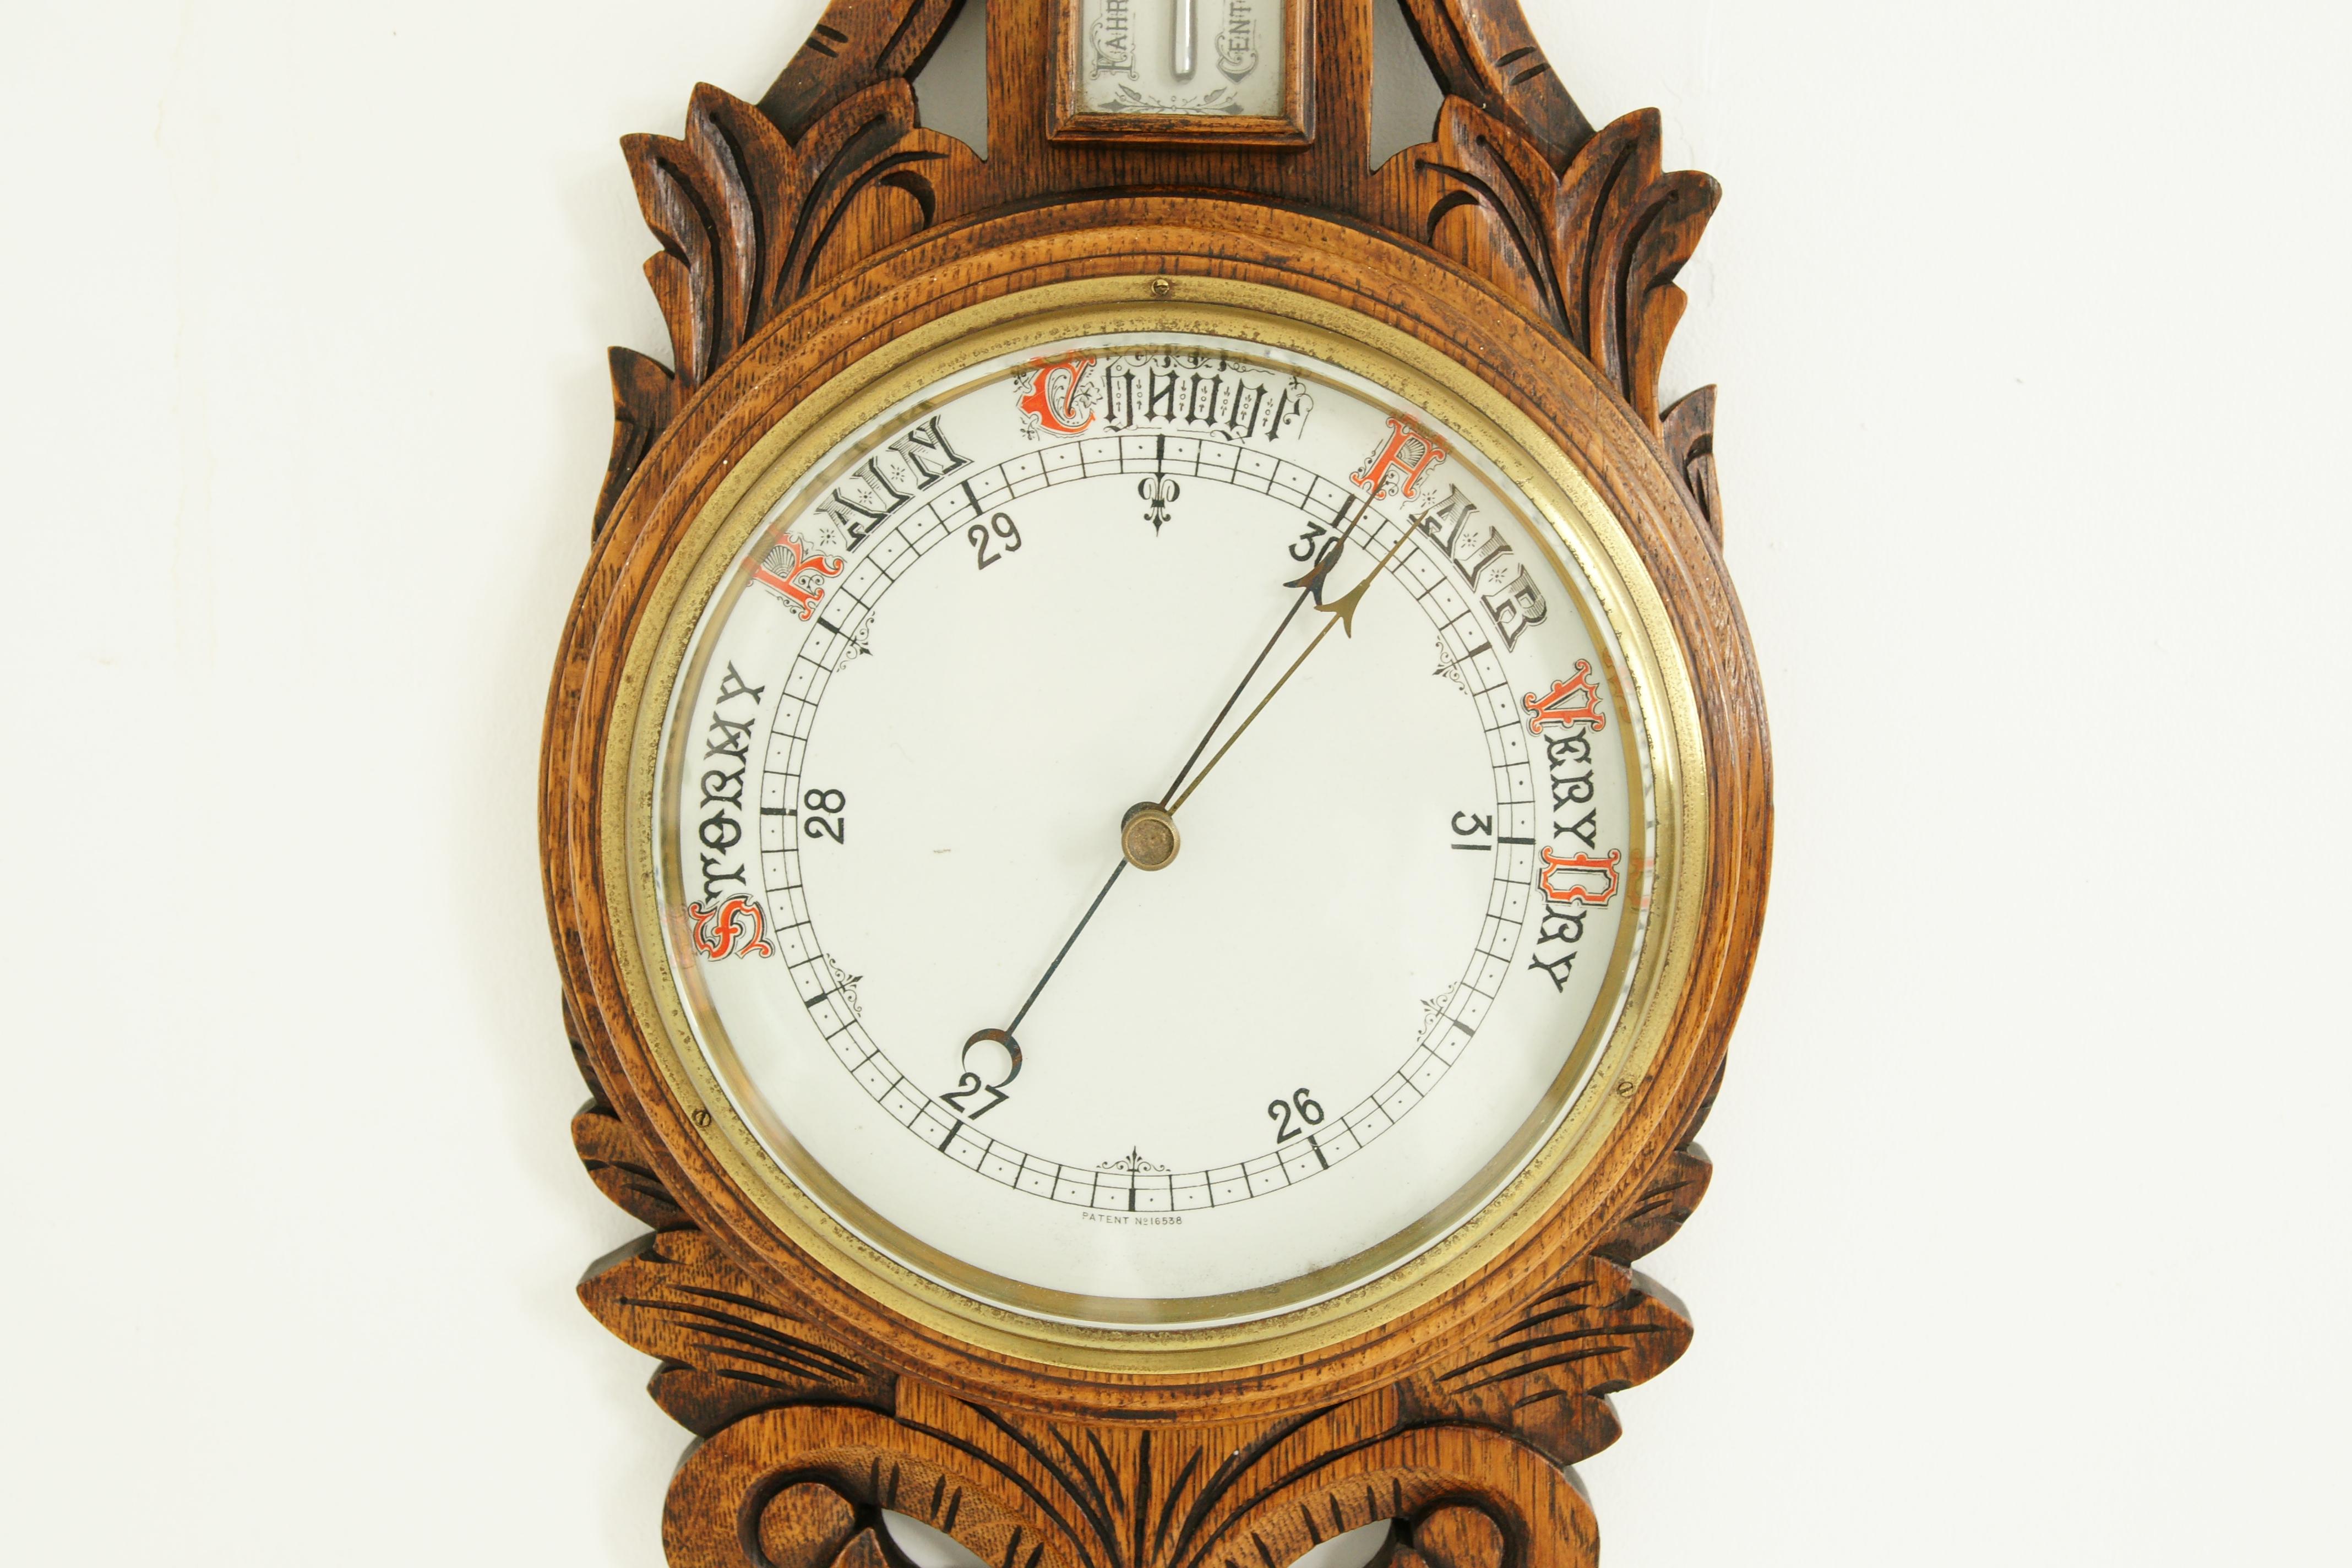 Antique barometer with thermometer, antique weather station, carved oak, Scotland 1890, antique furniture, B1340

Scotland, 1890
All original
Nicely carved decorative case
Thermometer to the top
Porcelain dial below
Appears to be in working